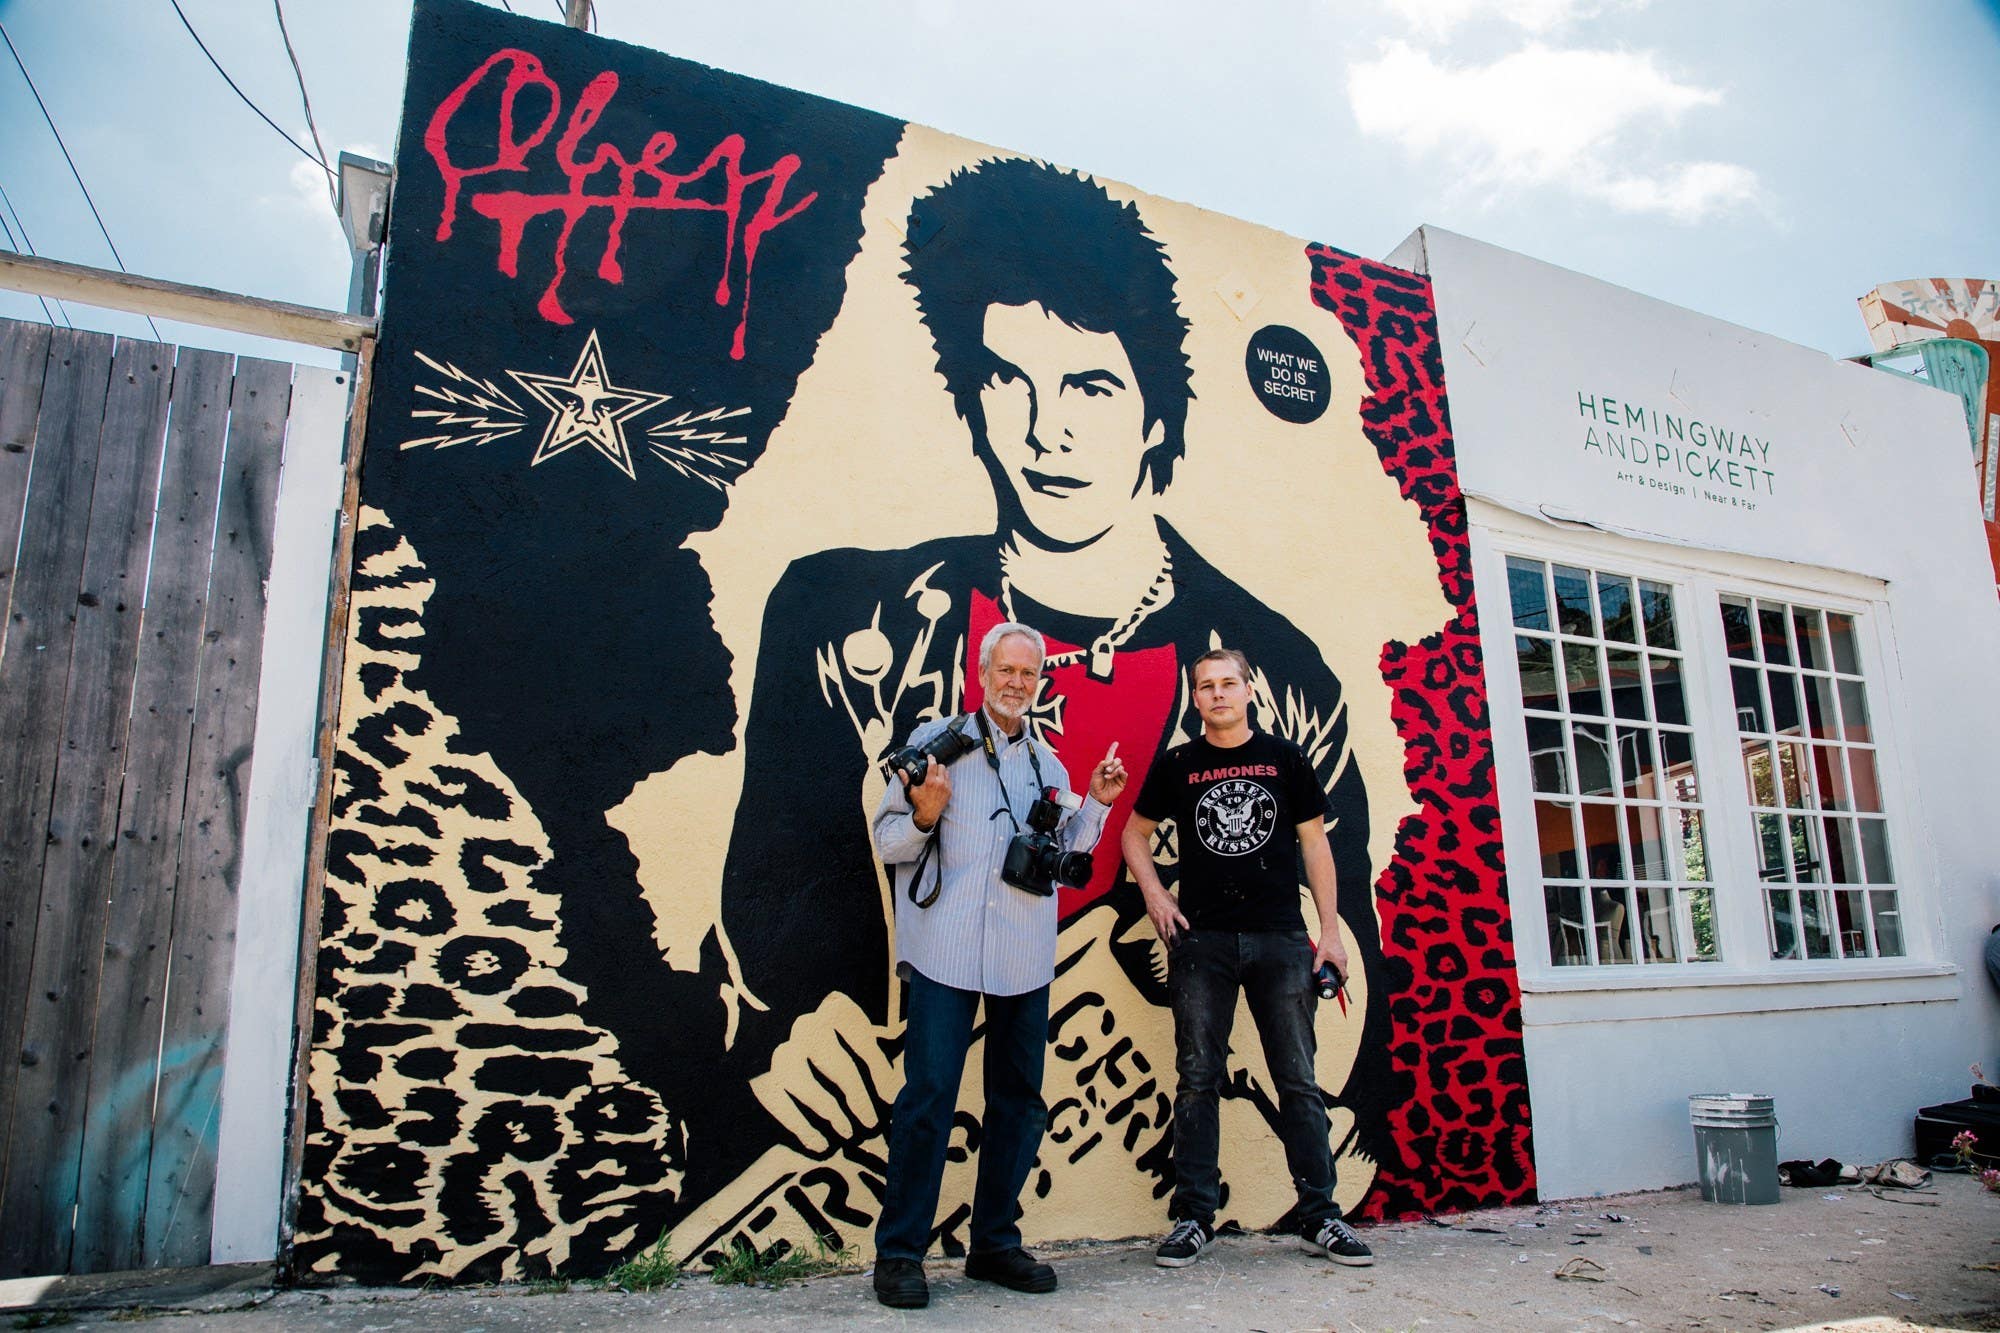 Gary Leonard and Shepard Fairey in front of the restored Darby Crash mural | Photo: Obey Giant